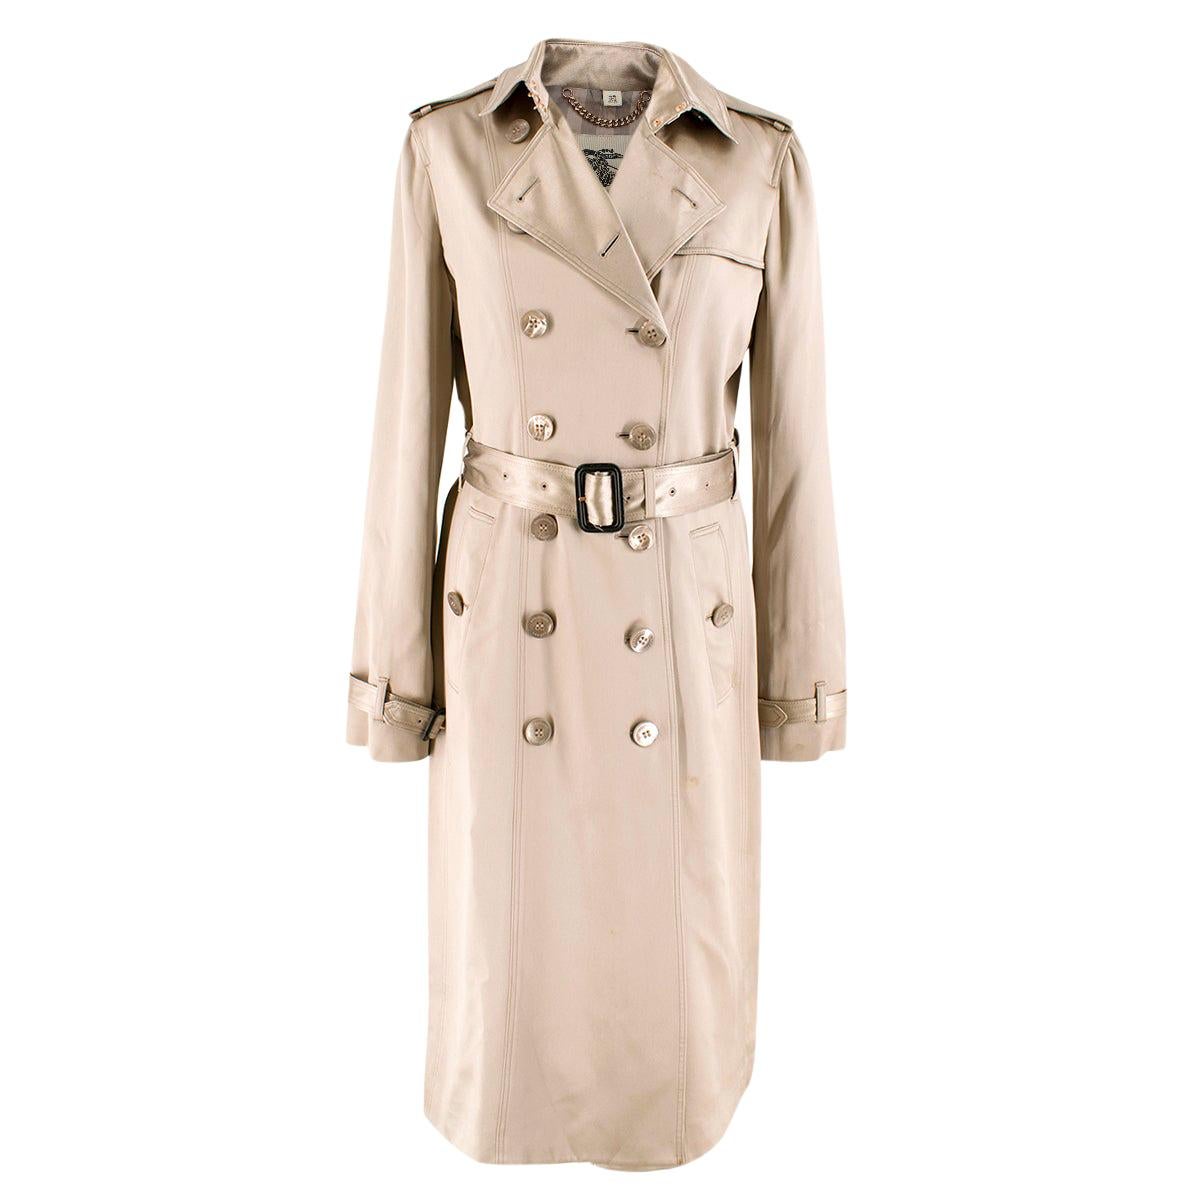 Burberry Metallic Silk Double-Breasted Wrap Trench Coat 10 (UK)